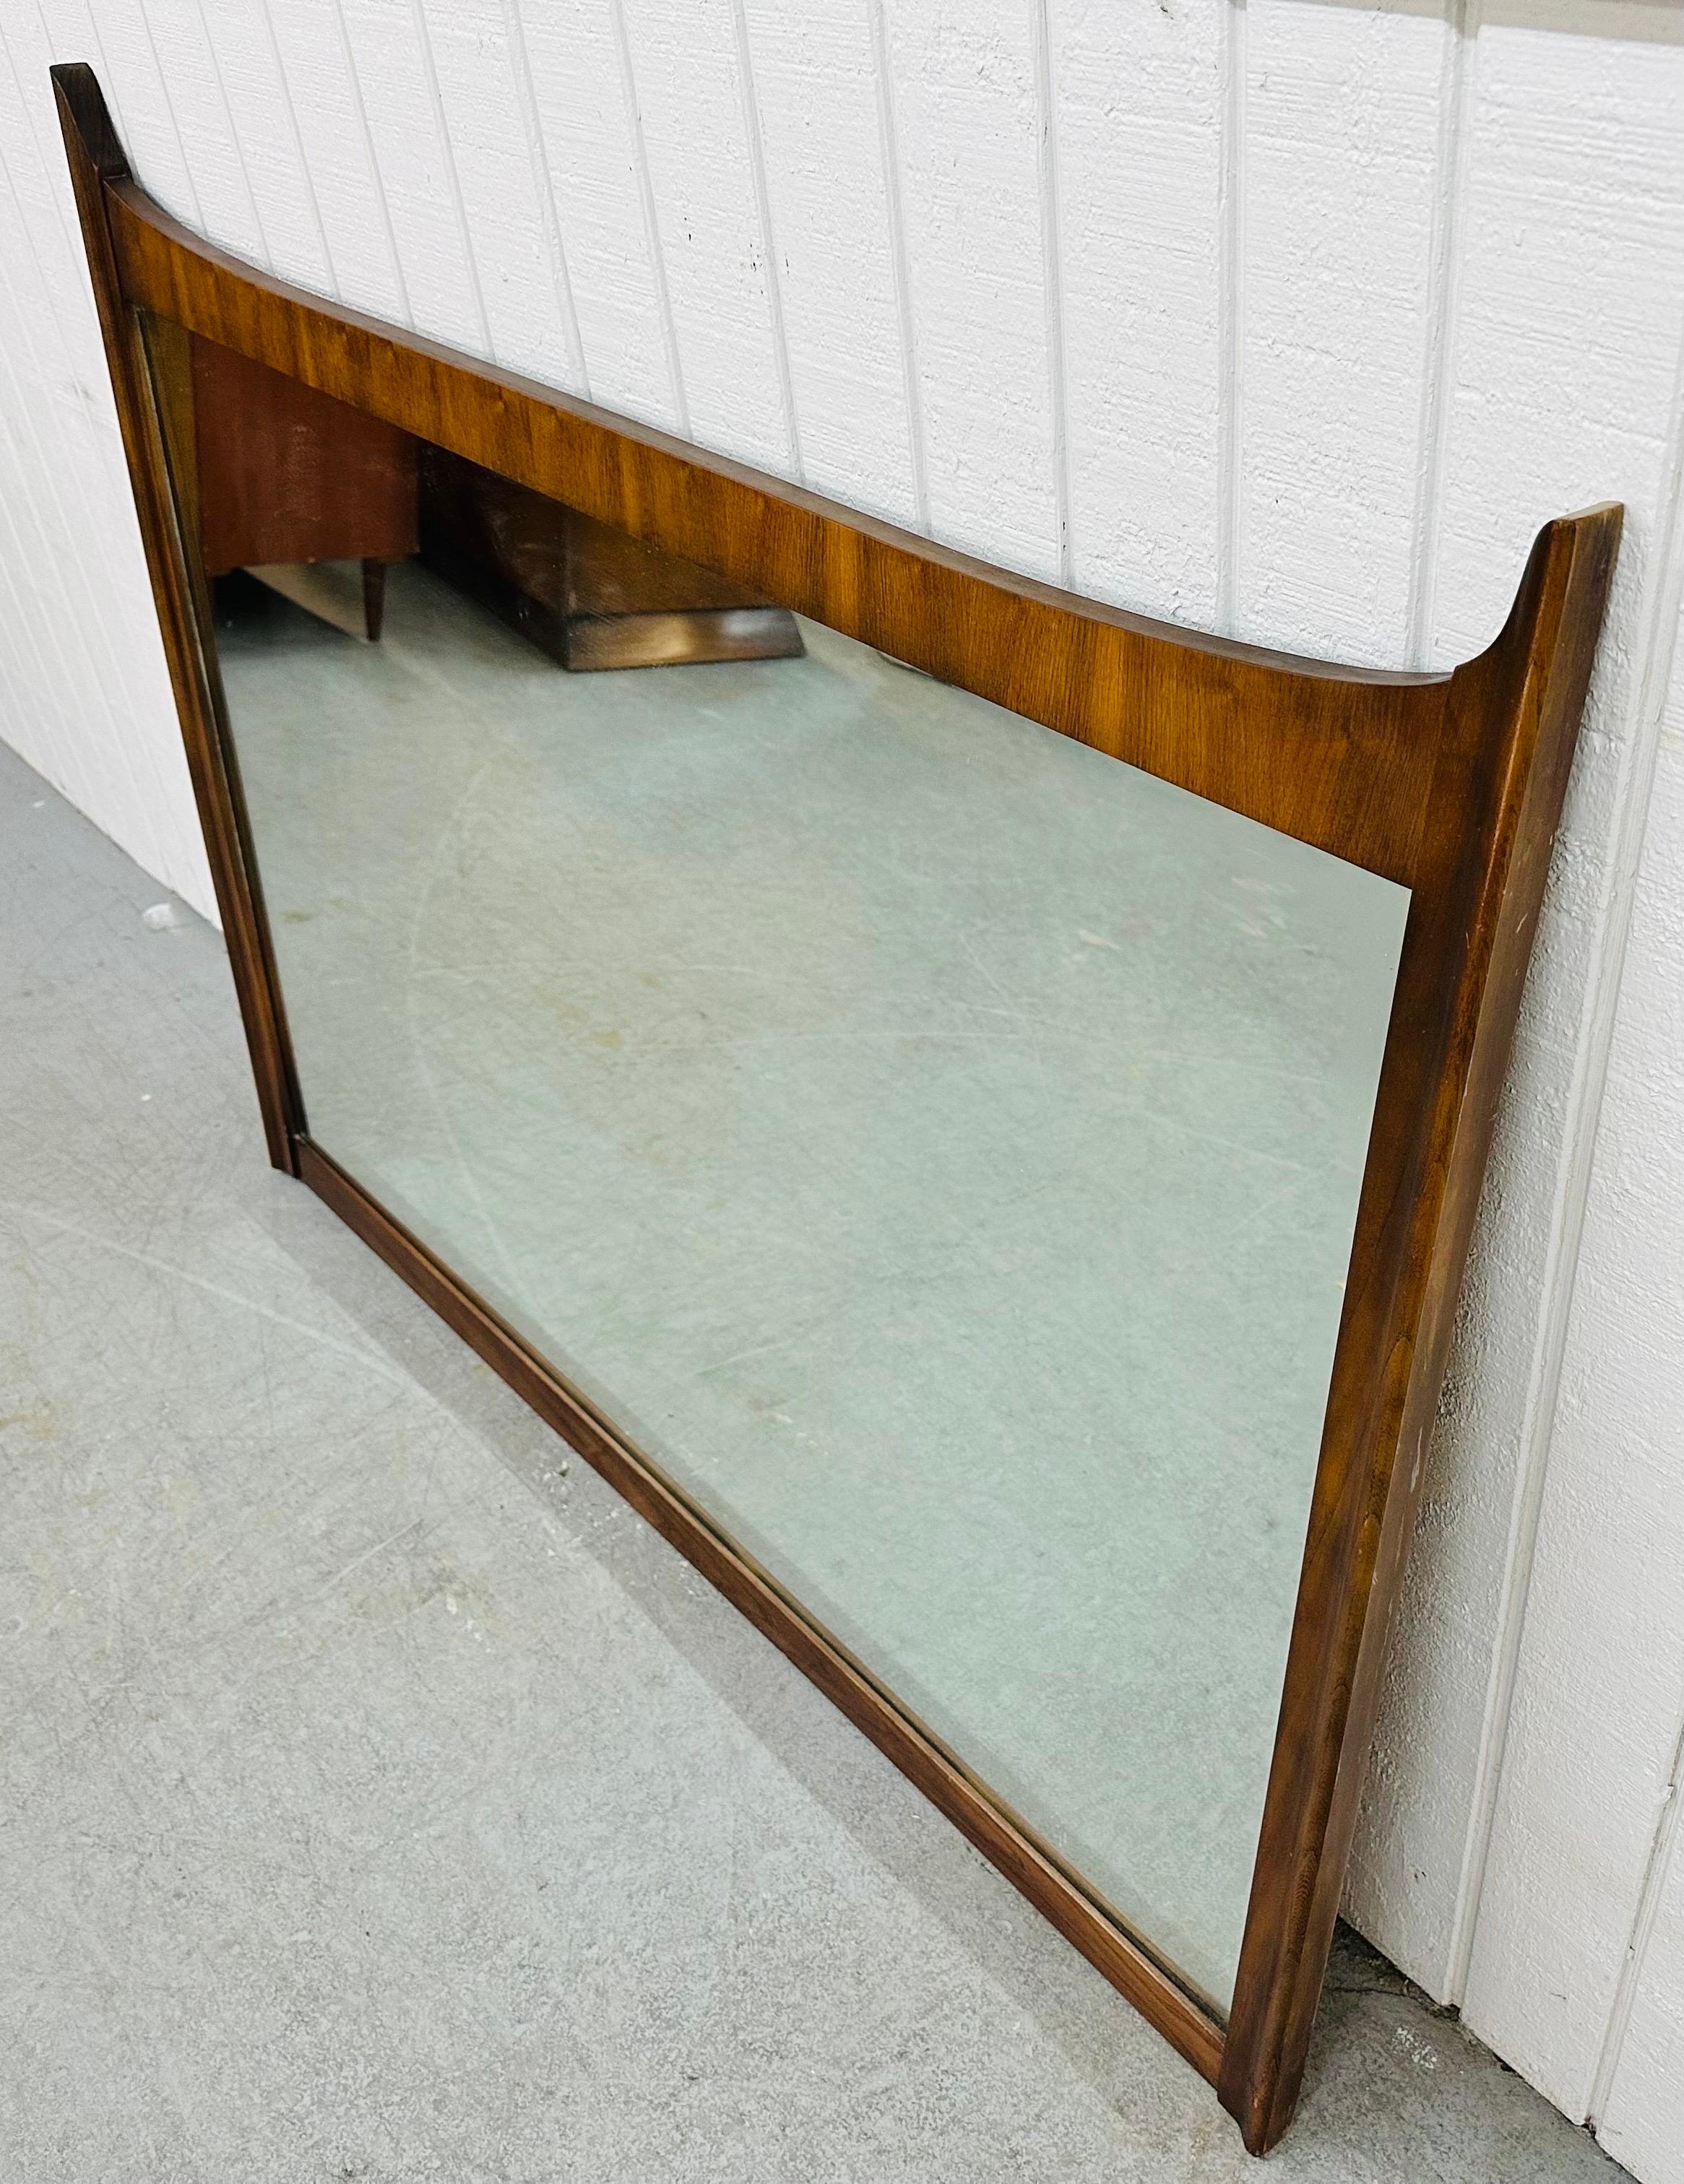 This listing is for a Mid-Century Modern Walnut Wall Mirror. Featuring a rectangular design, sculpted corners, and a beautiful walnut finish. This is an exceptional combination of quality and design!